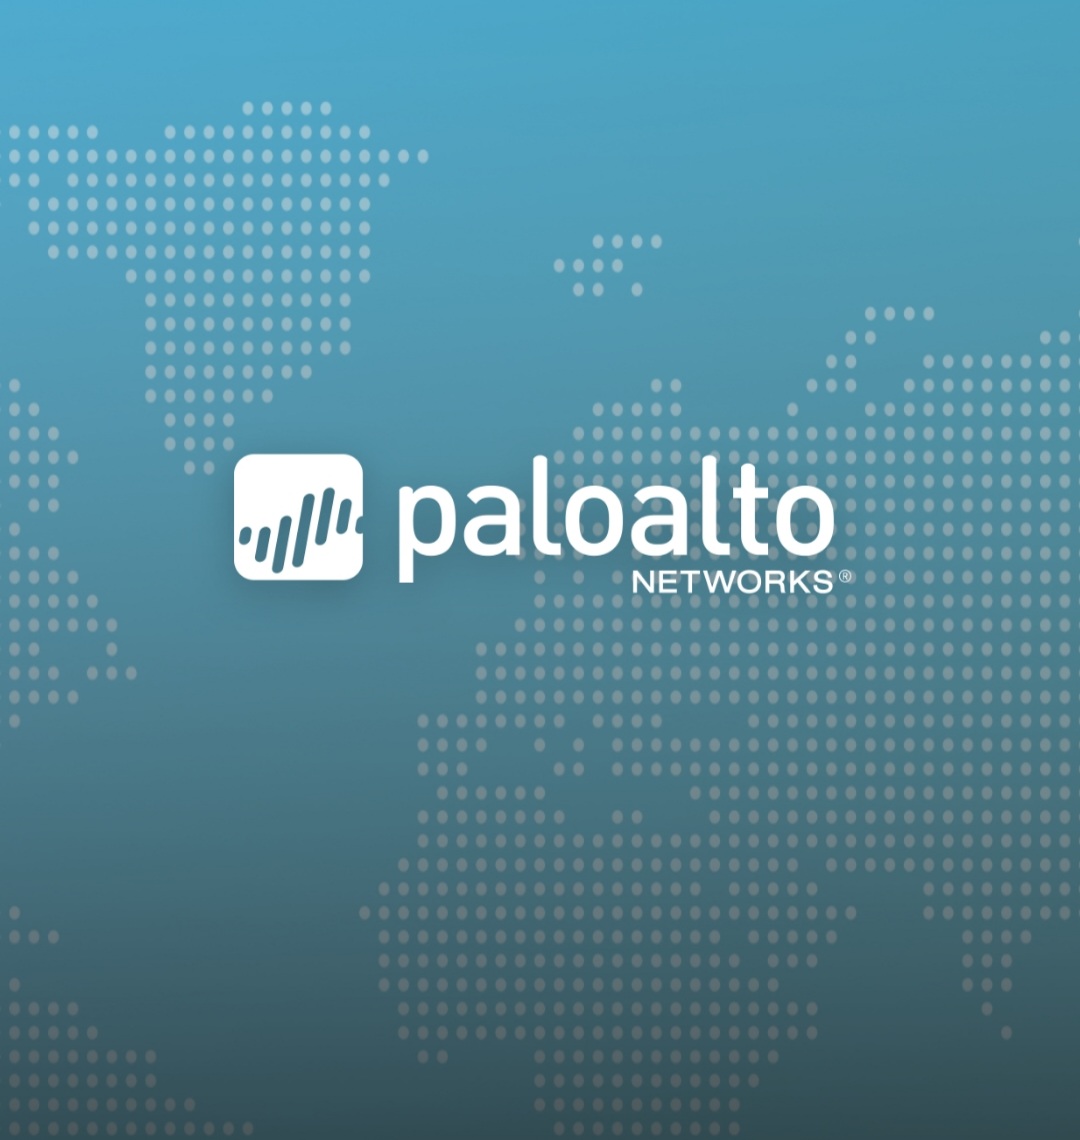 palo alto networks opening screen